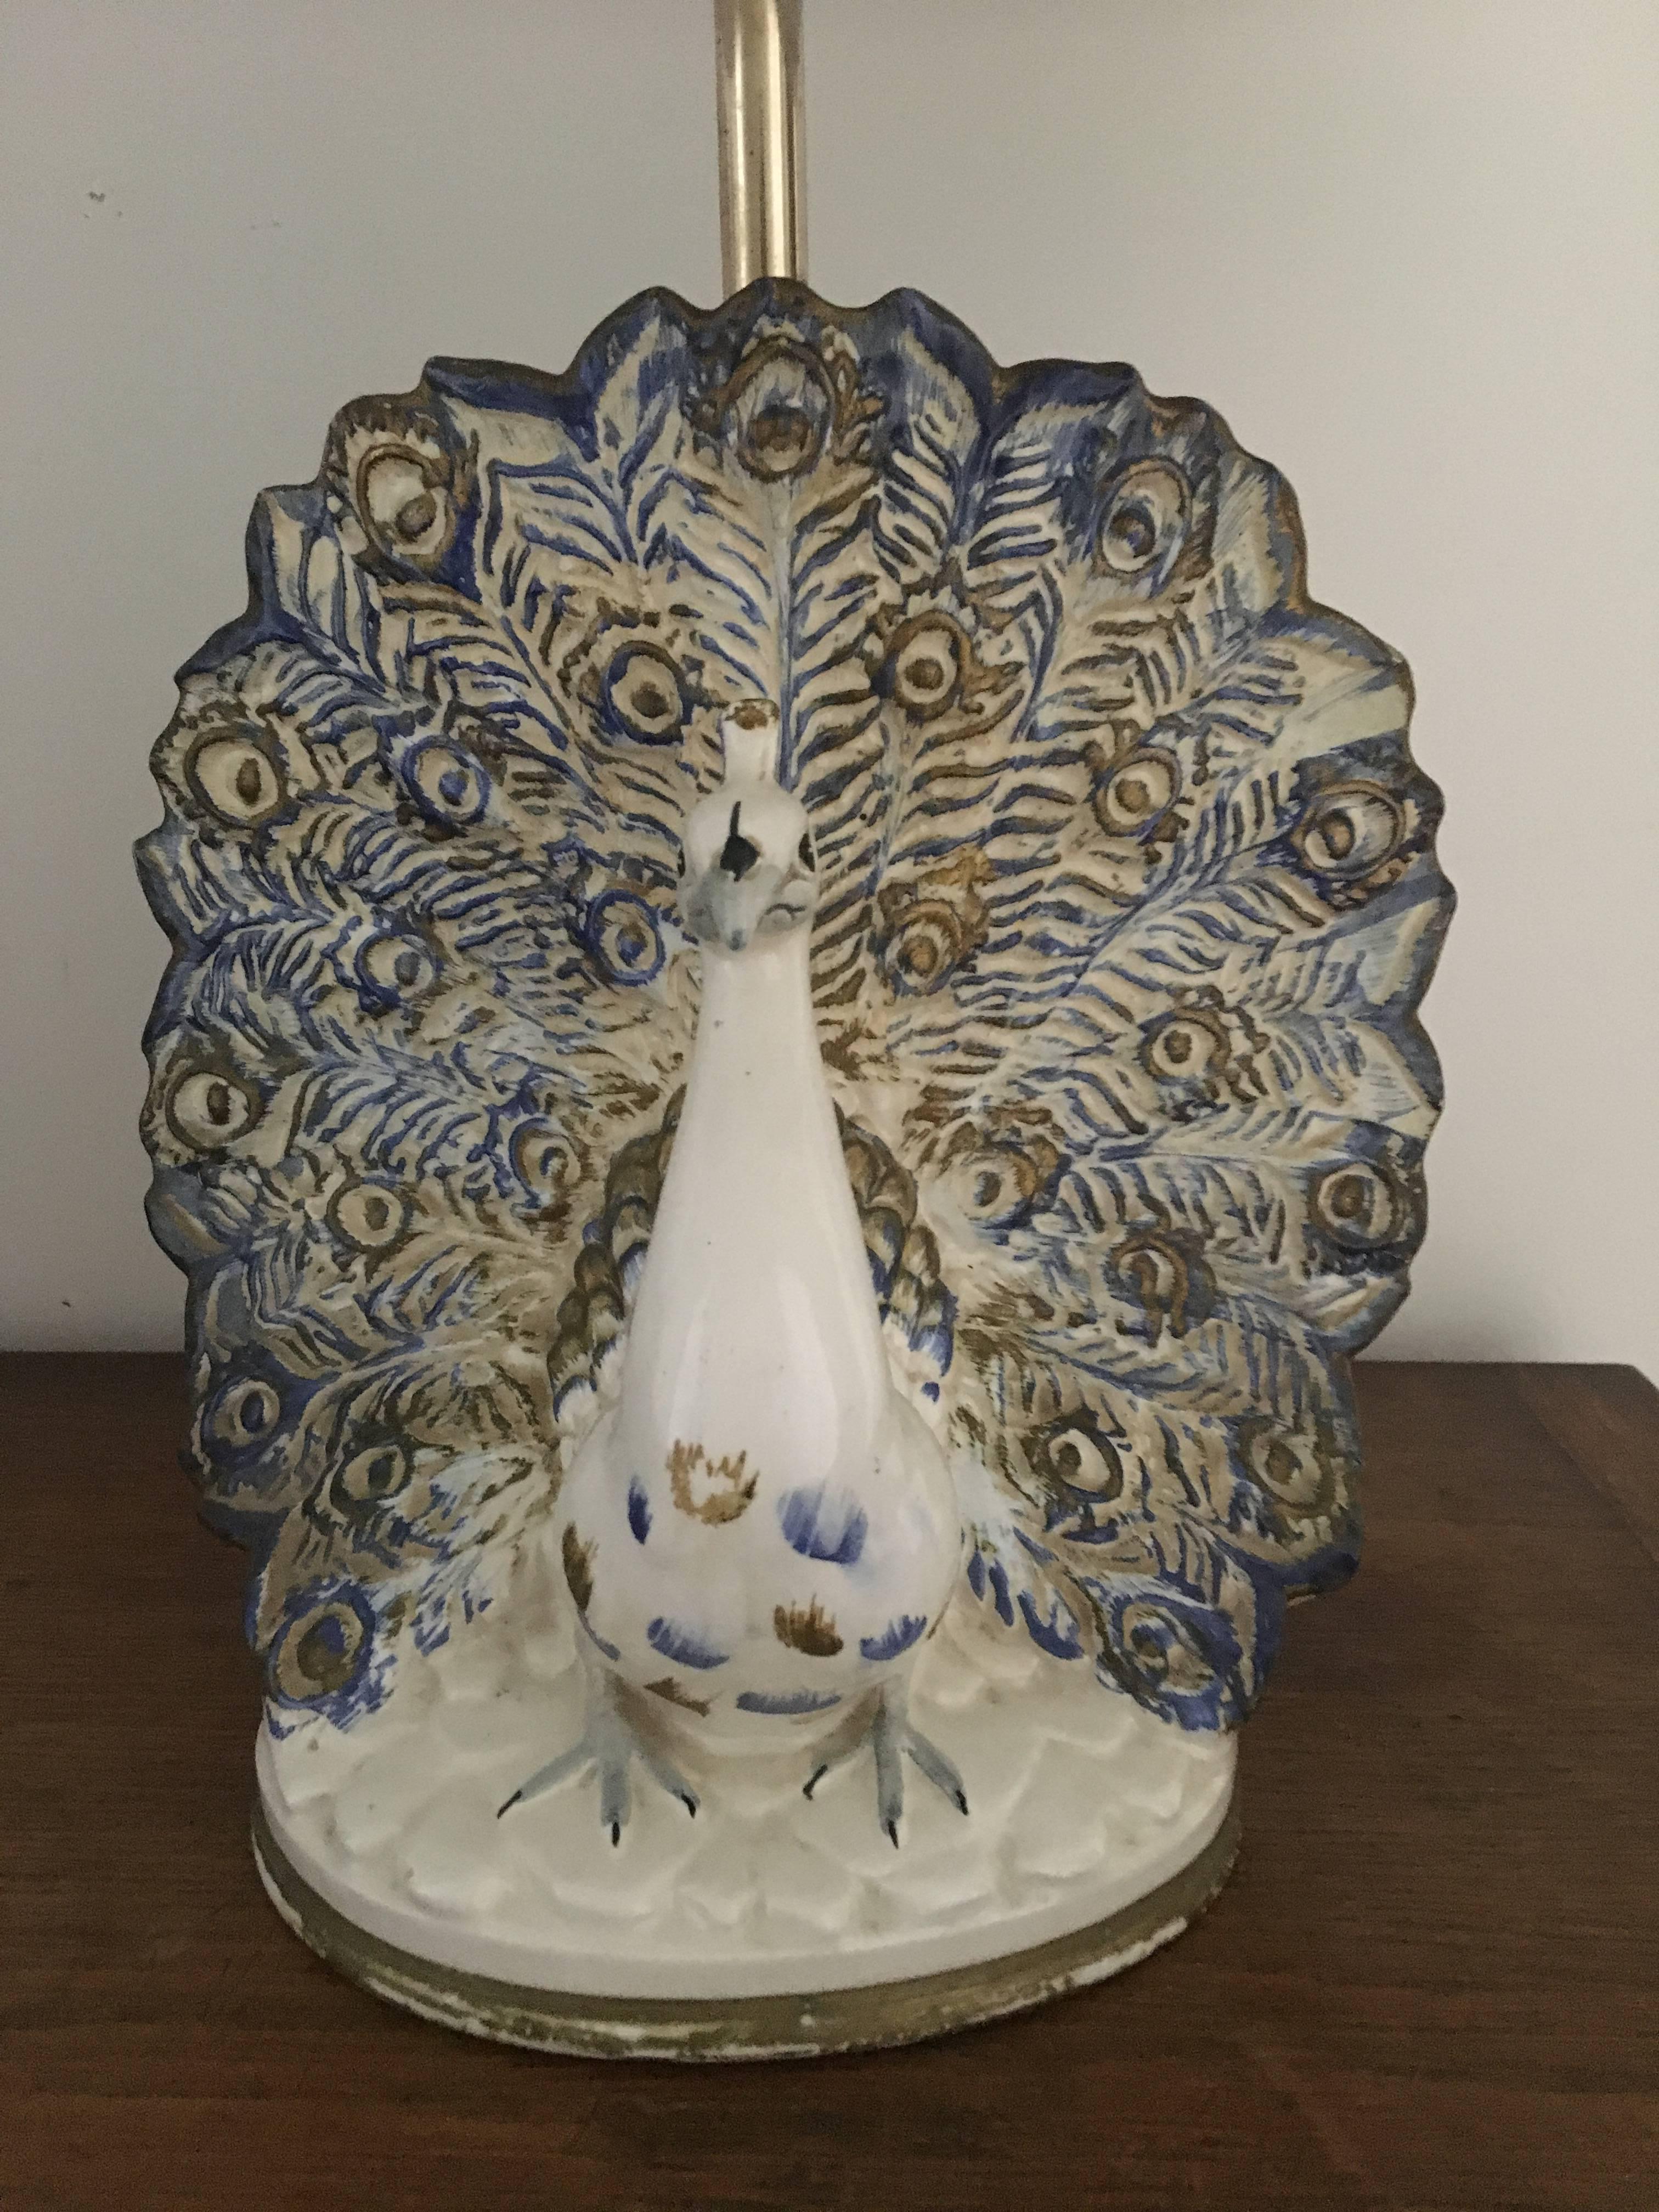 Beautiful peacock in ceramic from the 1960s with brass stem.
European wiring